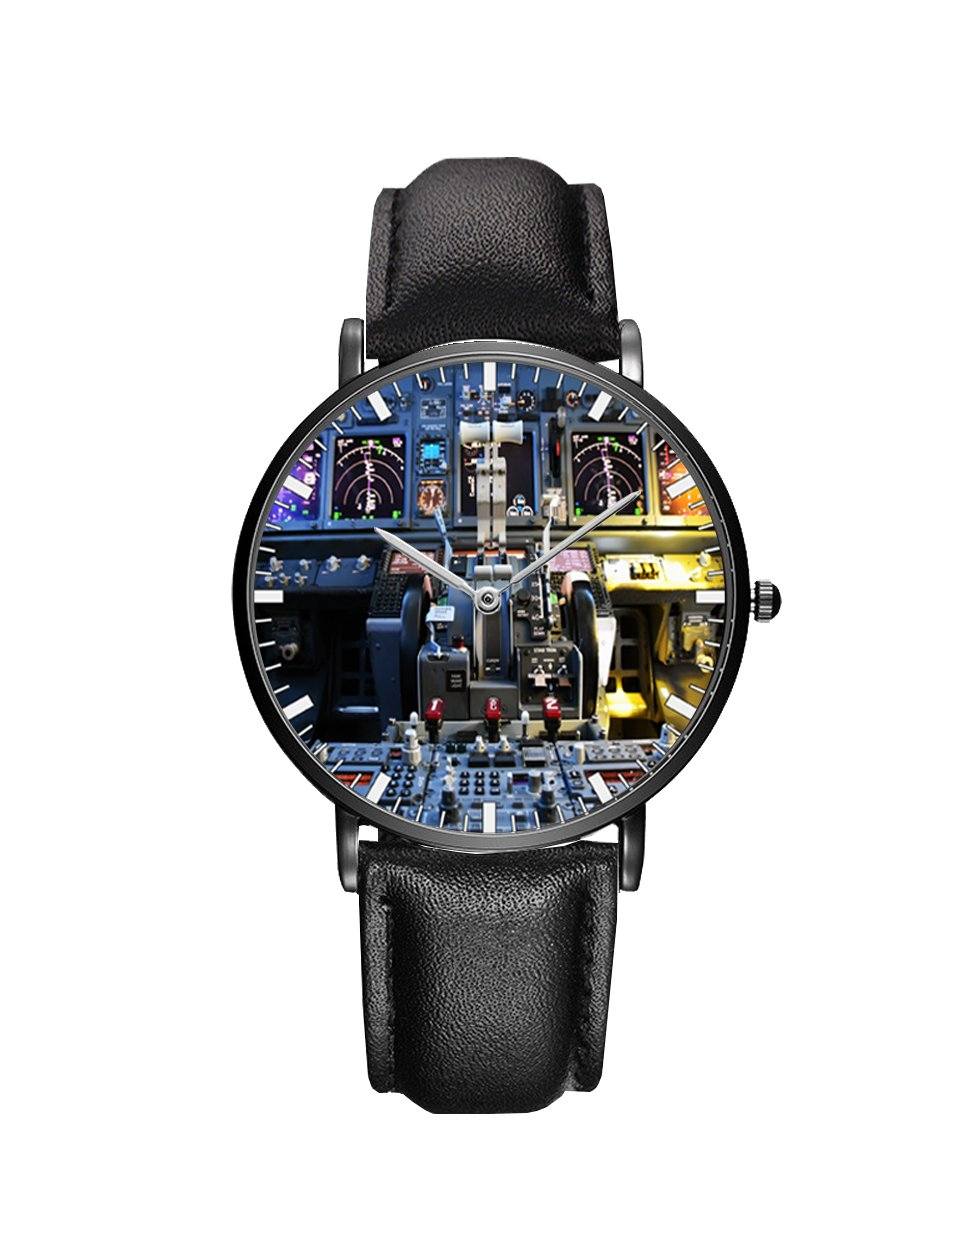 Boeing 737 Cockpit Leather Strap Watches Pilot Eyes Store Black & Black Leather Strap 